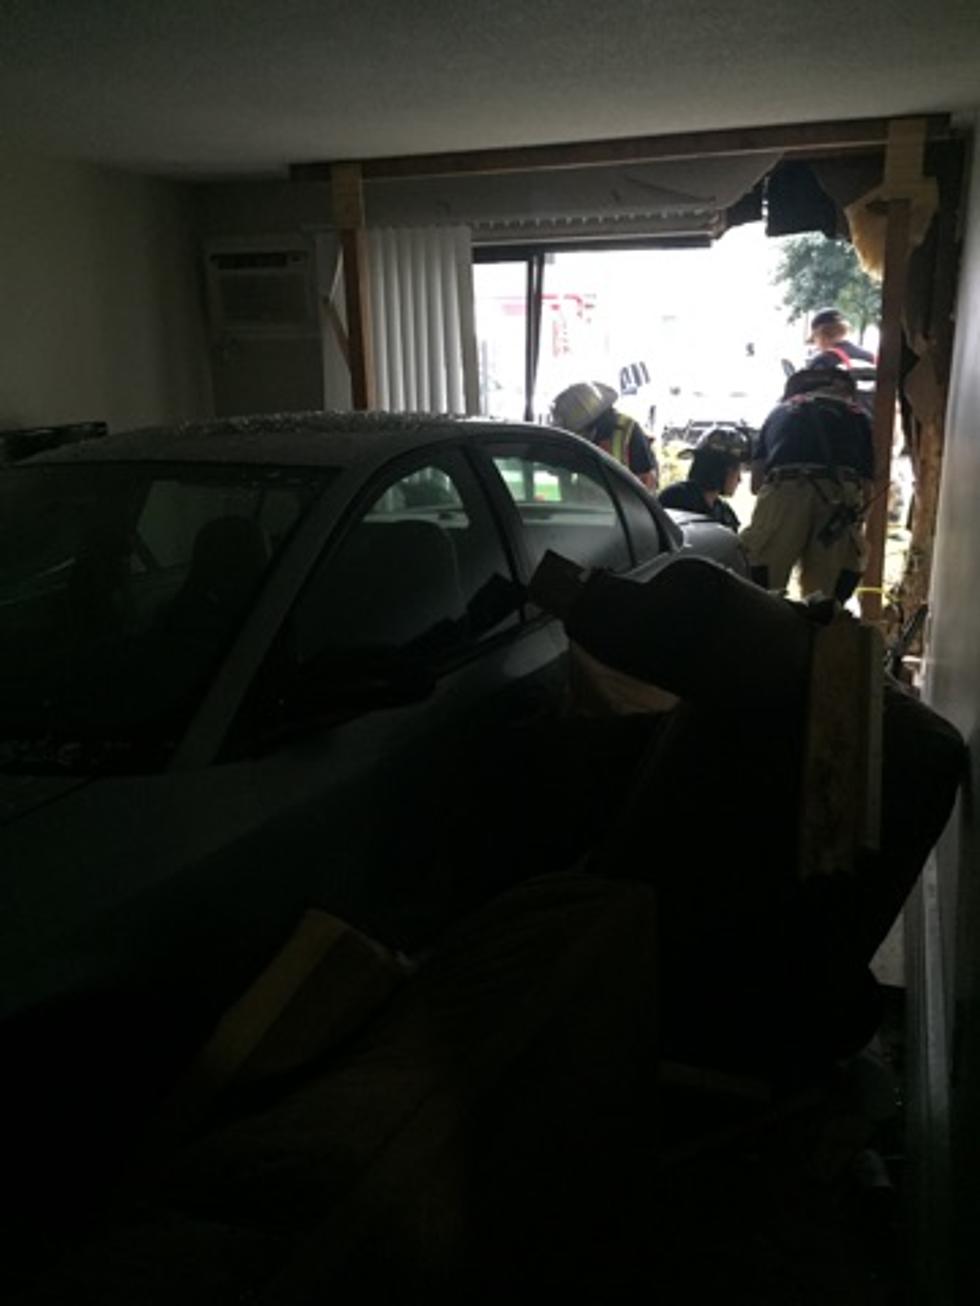 Car Slams into Rochester Apartment, Nearly Hits Baby